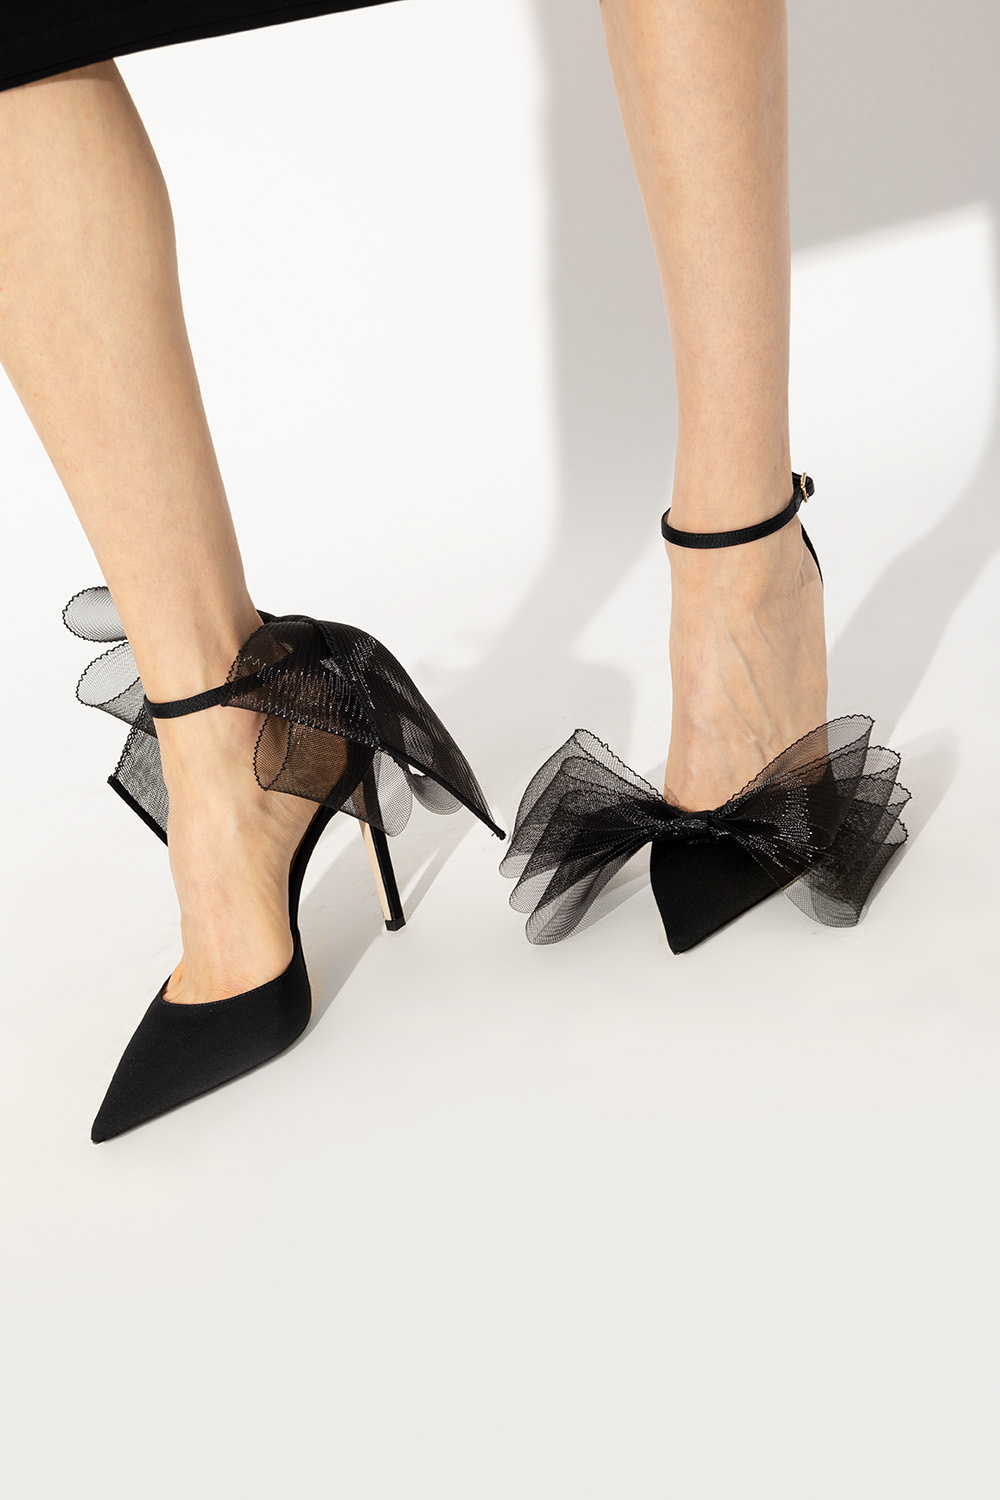 Jimmy Choo ‘Averly’ suede pumps